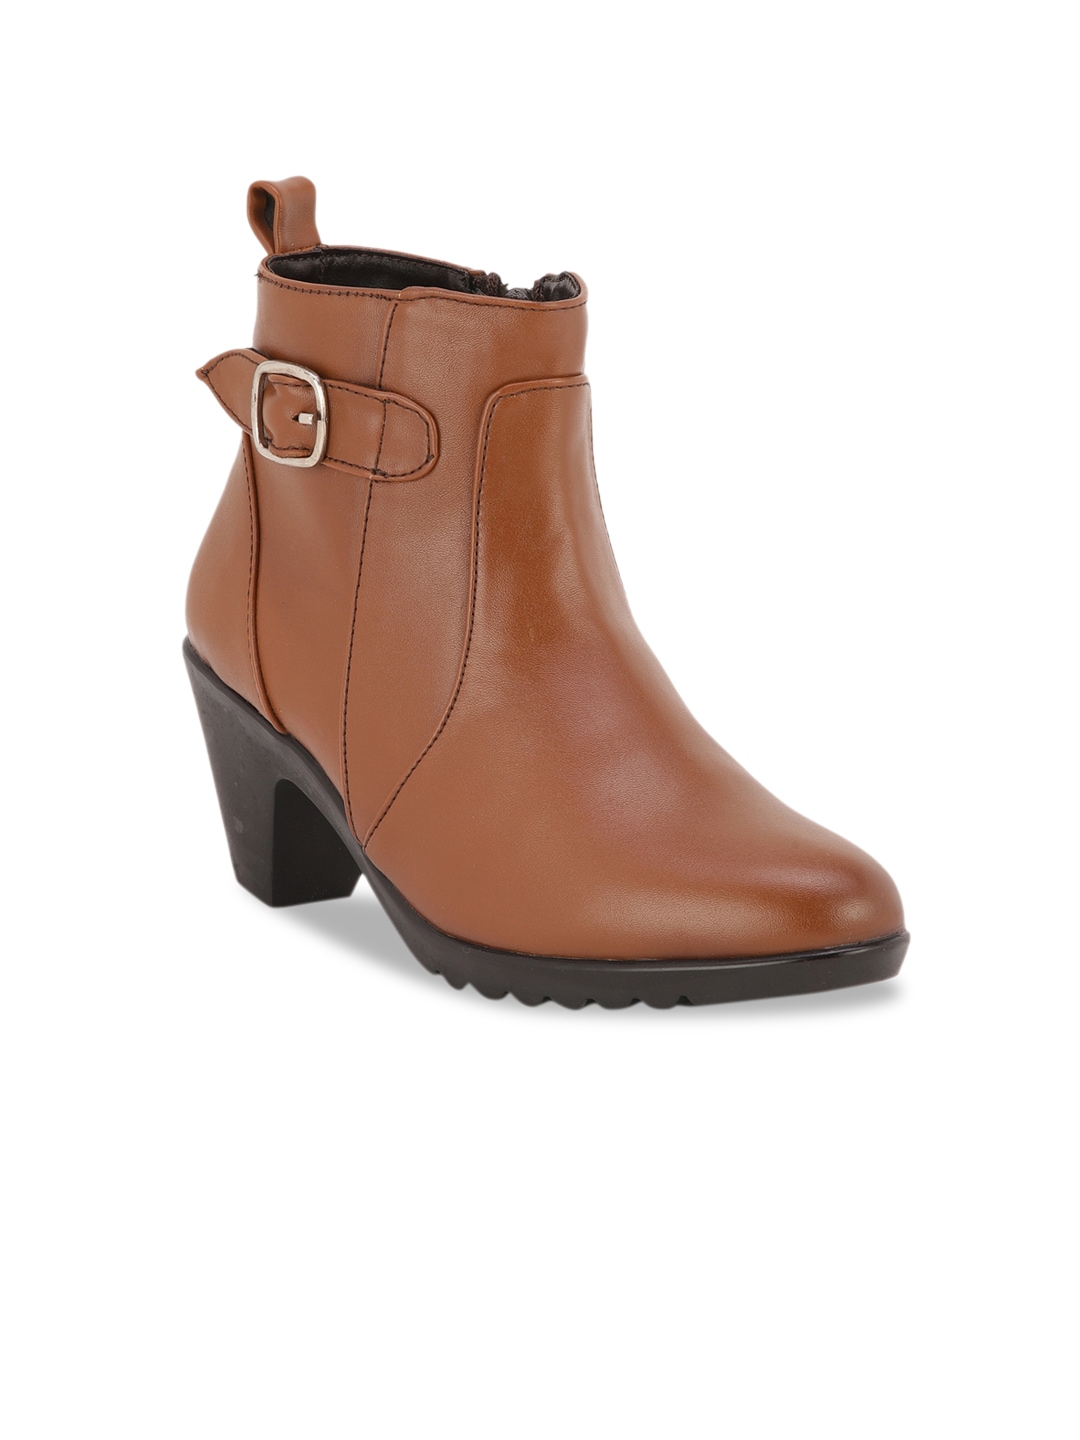 Bruno Manetti Women Tan Solid Heeled Boots Price in India